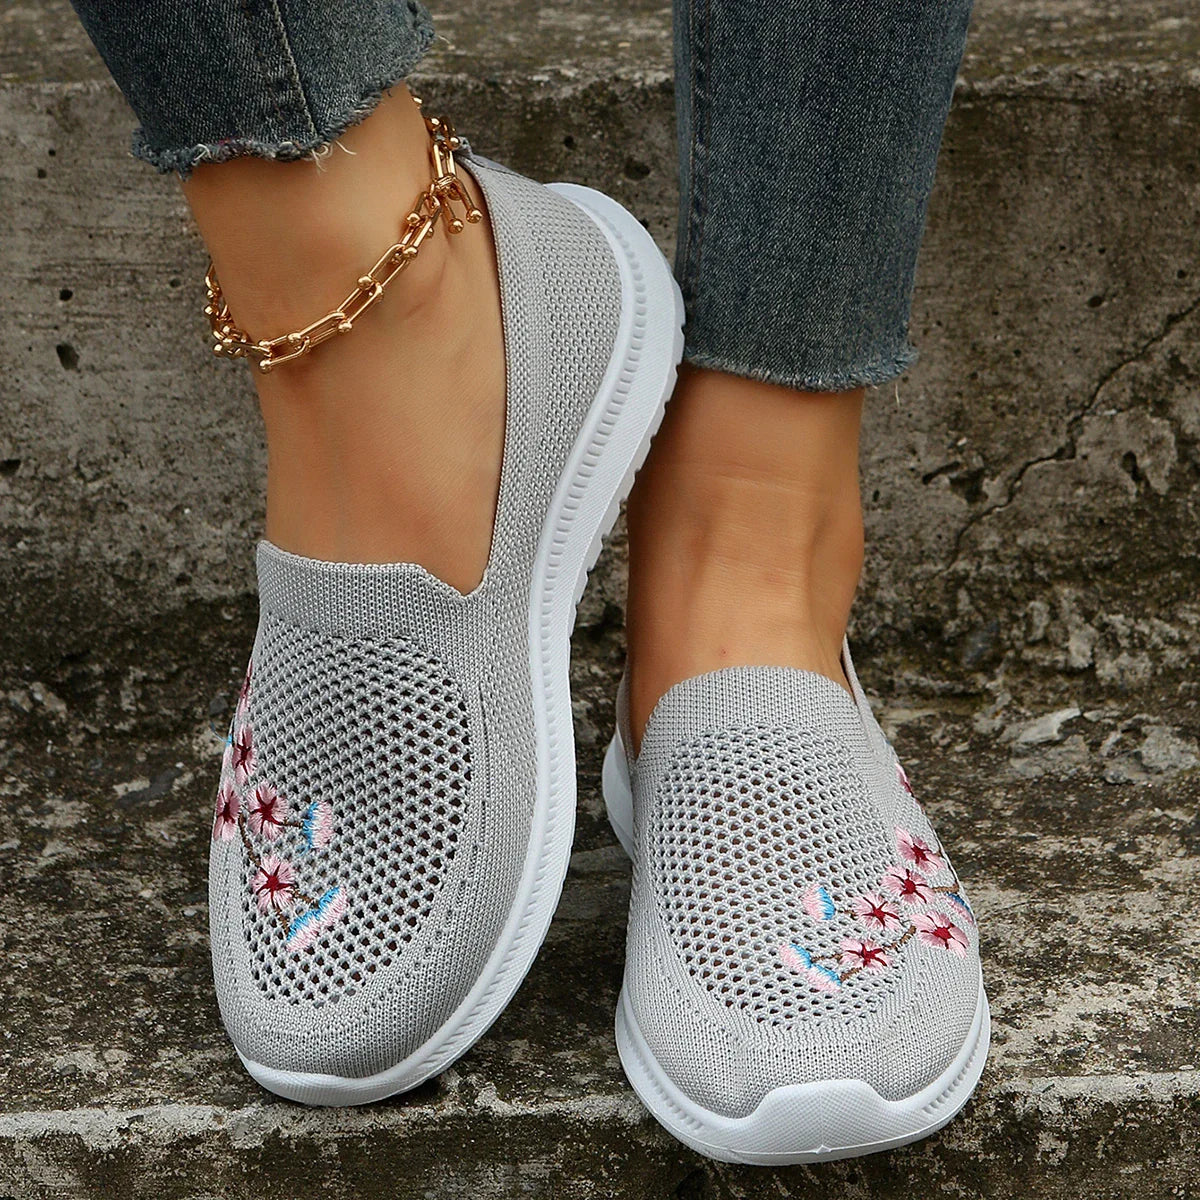 Gominglo -  Knitted Embroidered Flats